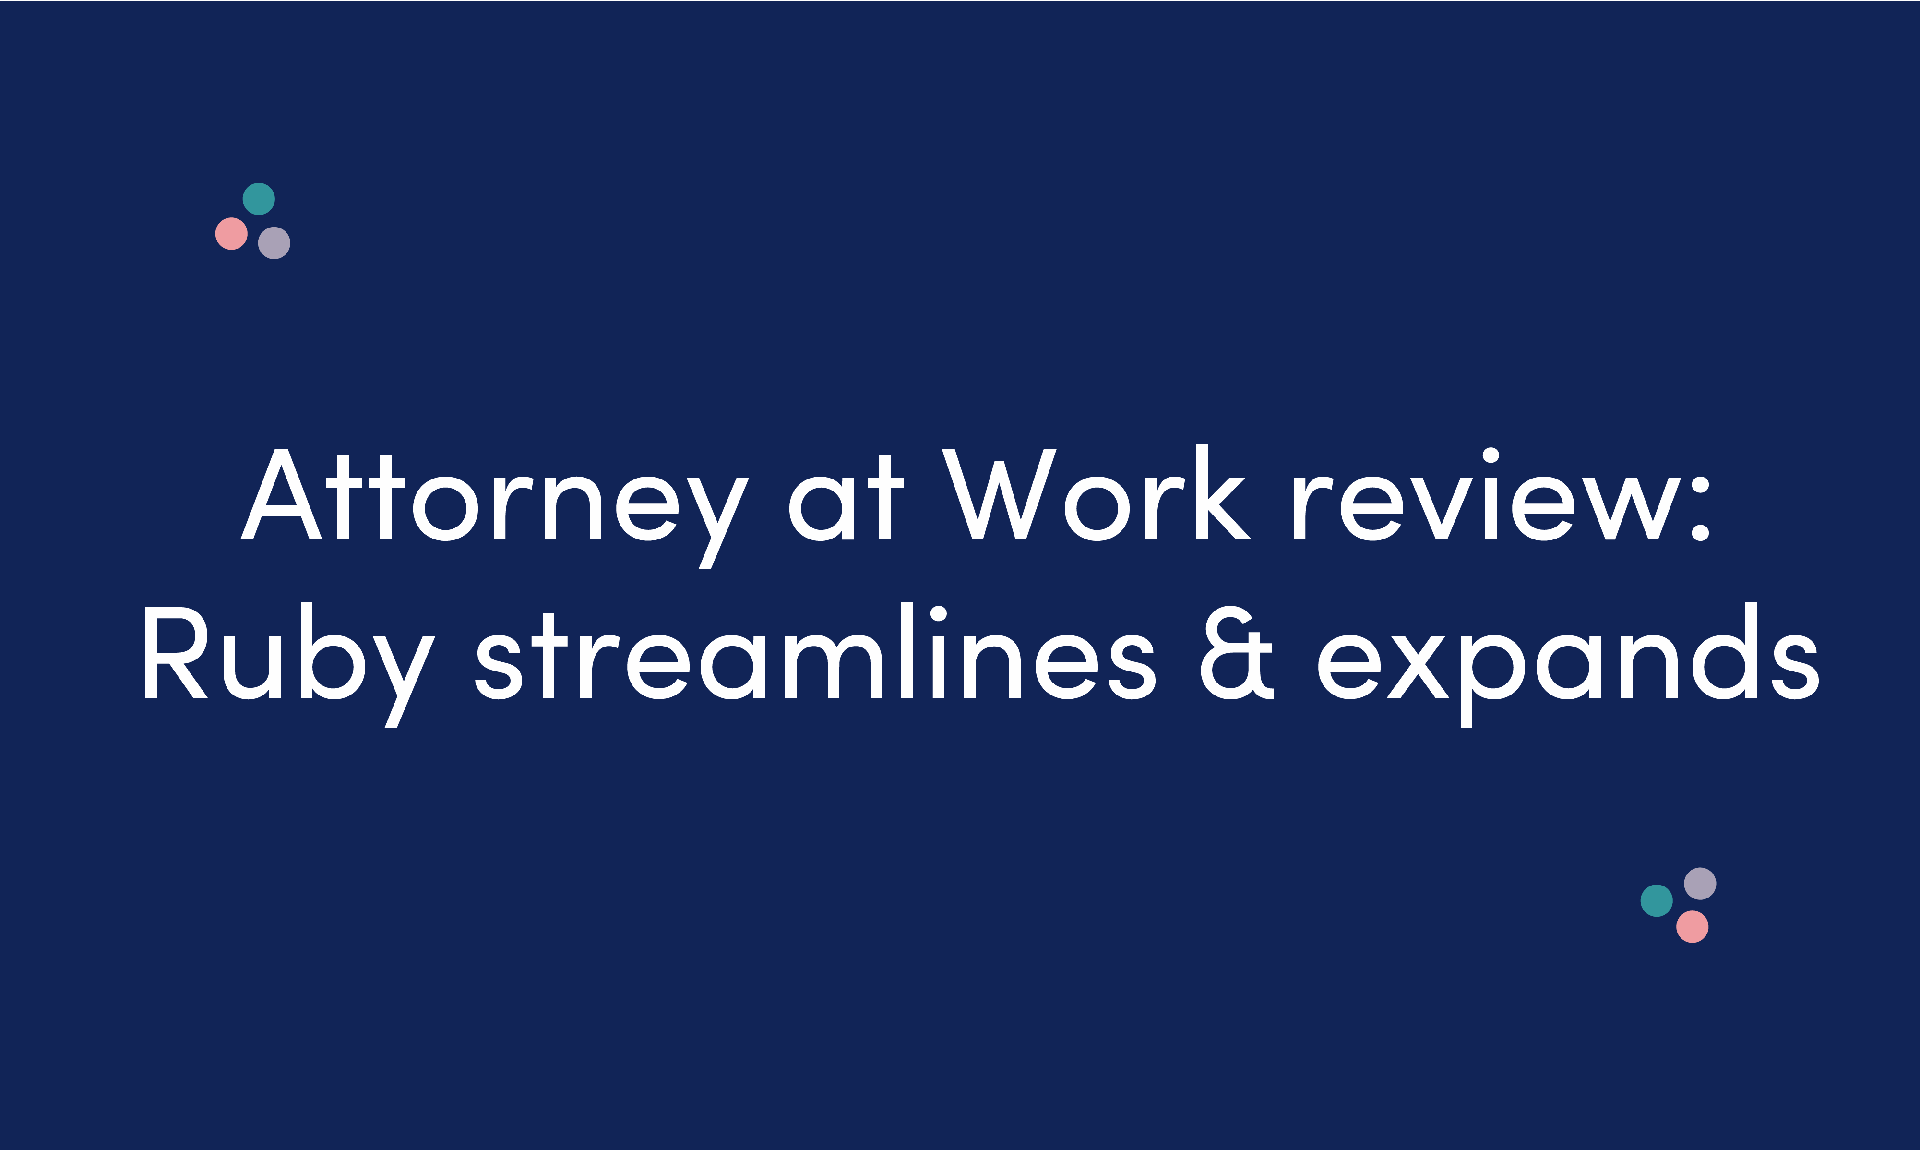 White text on dark blue background: Attorney at Work review: Ruby streamlines & expands